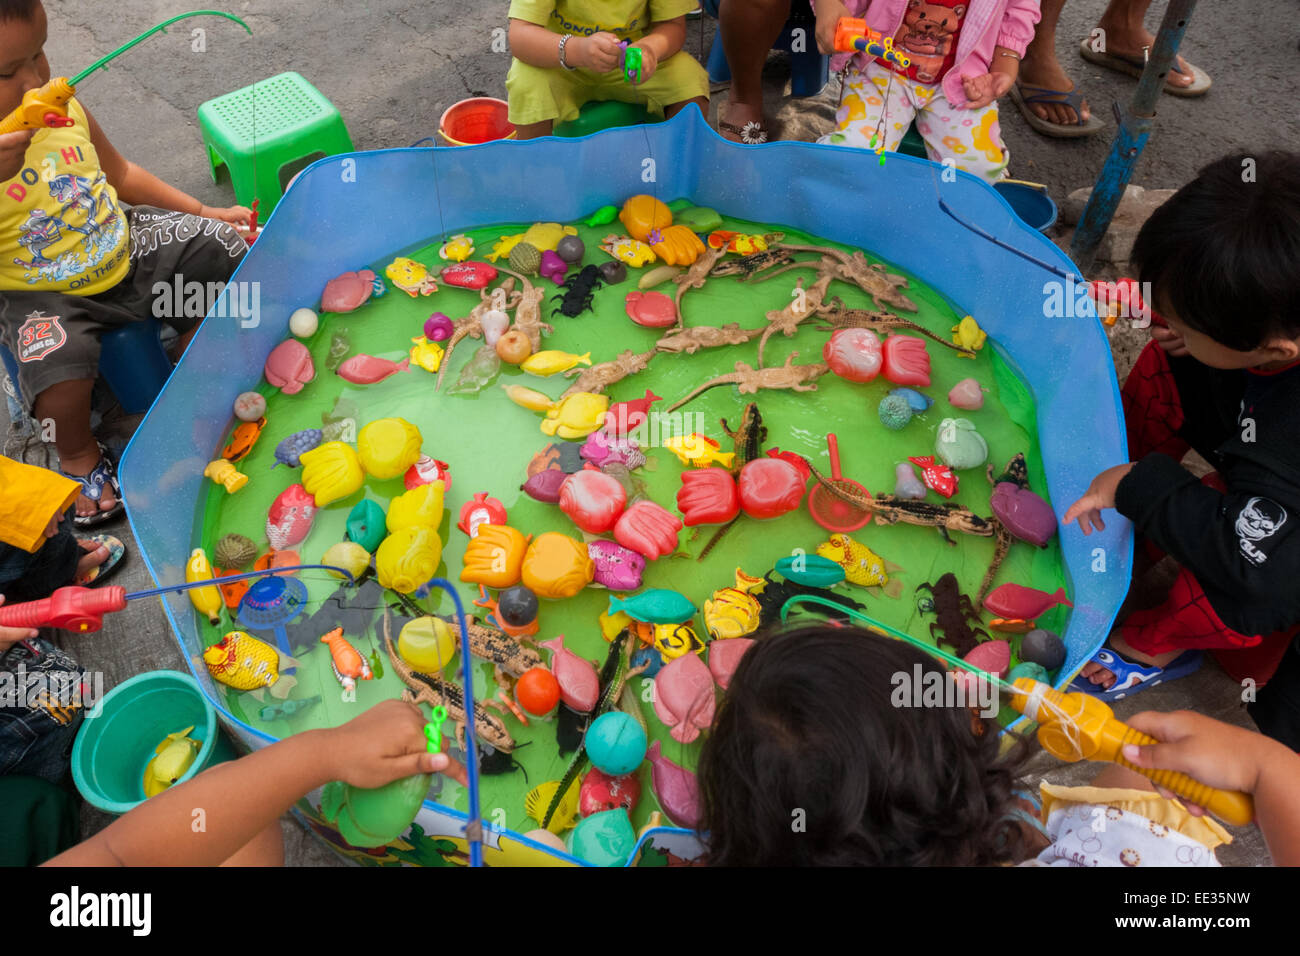 https://c8.alamy.com/comp/EE35NW/children-play-fishing-game-on-a-small-pond-containing-plastic-toys-EE35NW.jpg